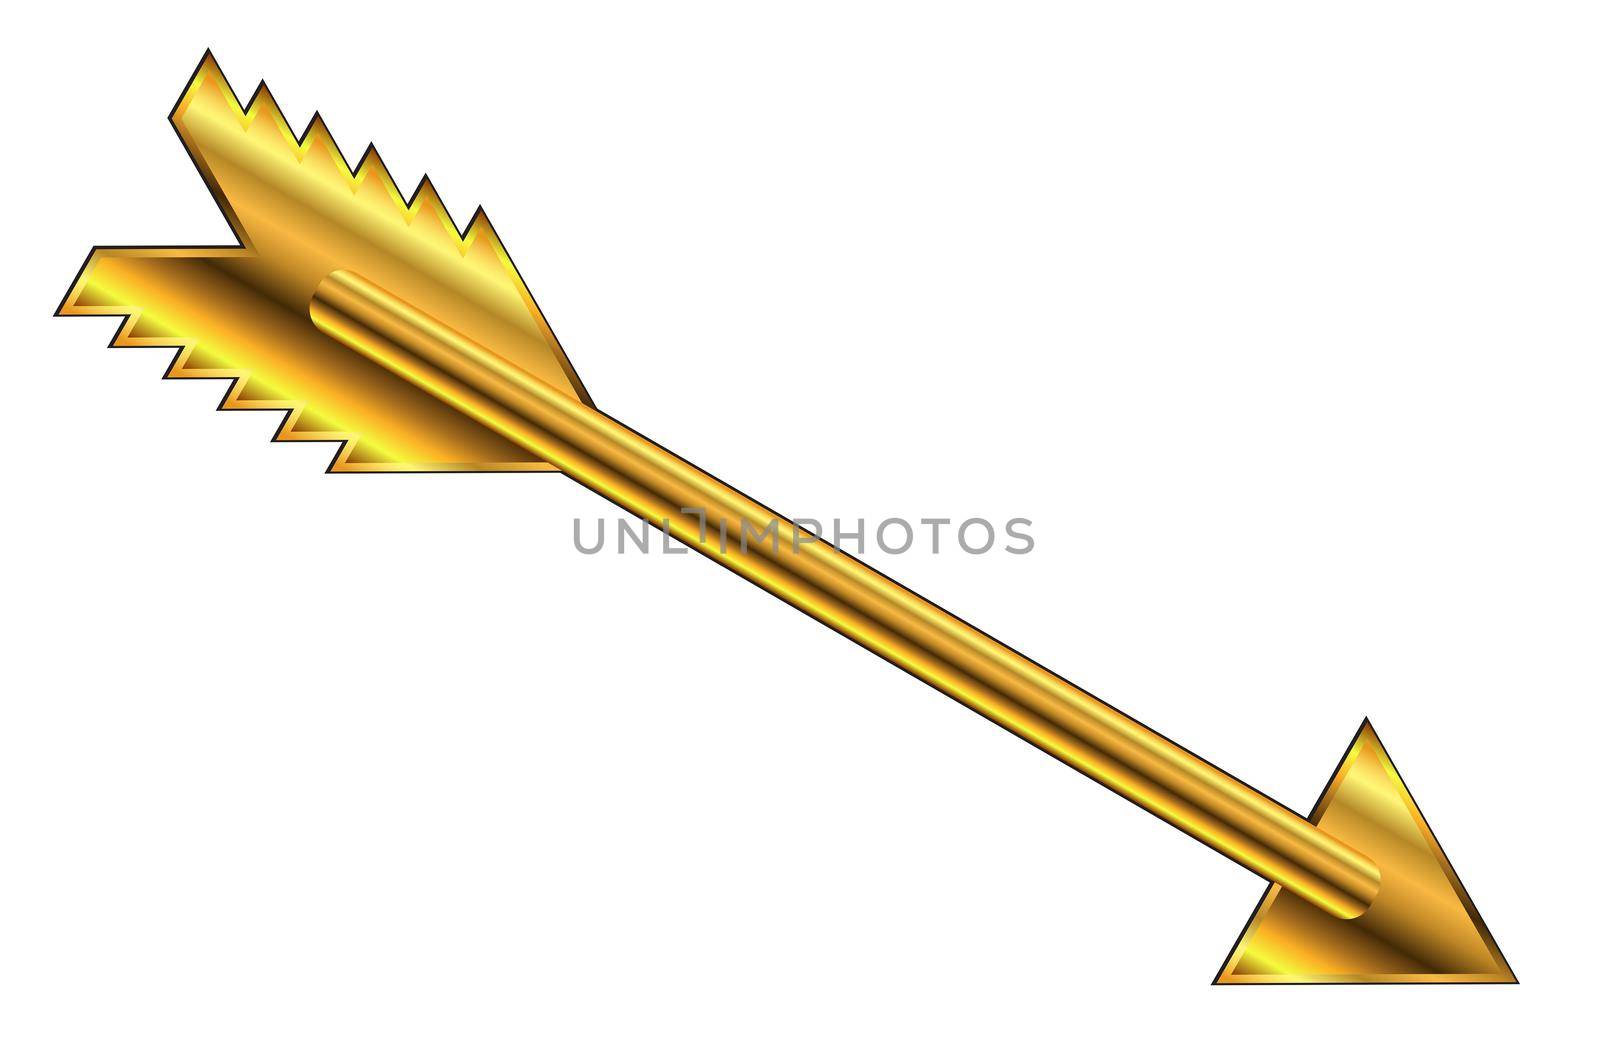 The golden arrow isolated over a white background